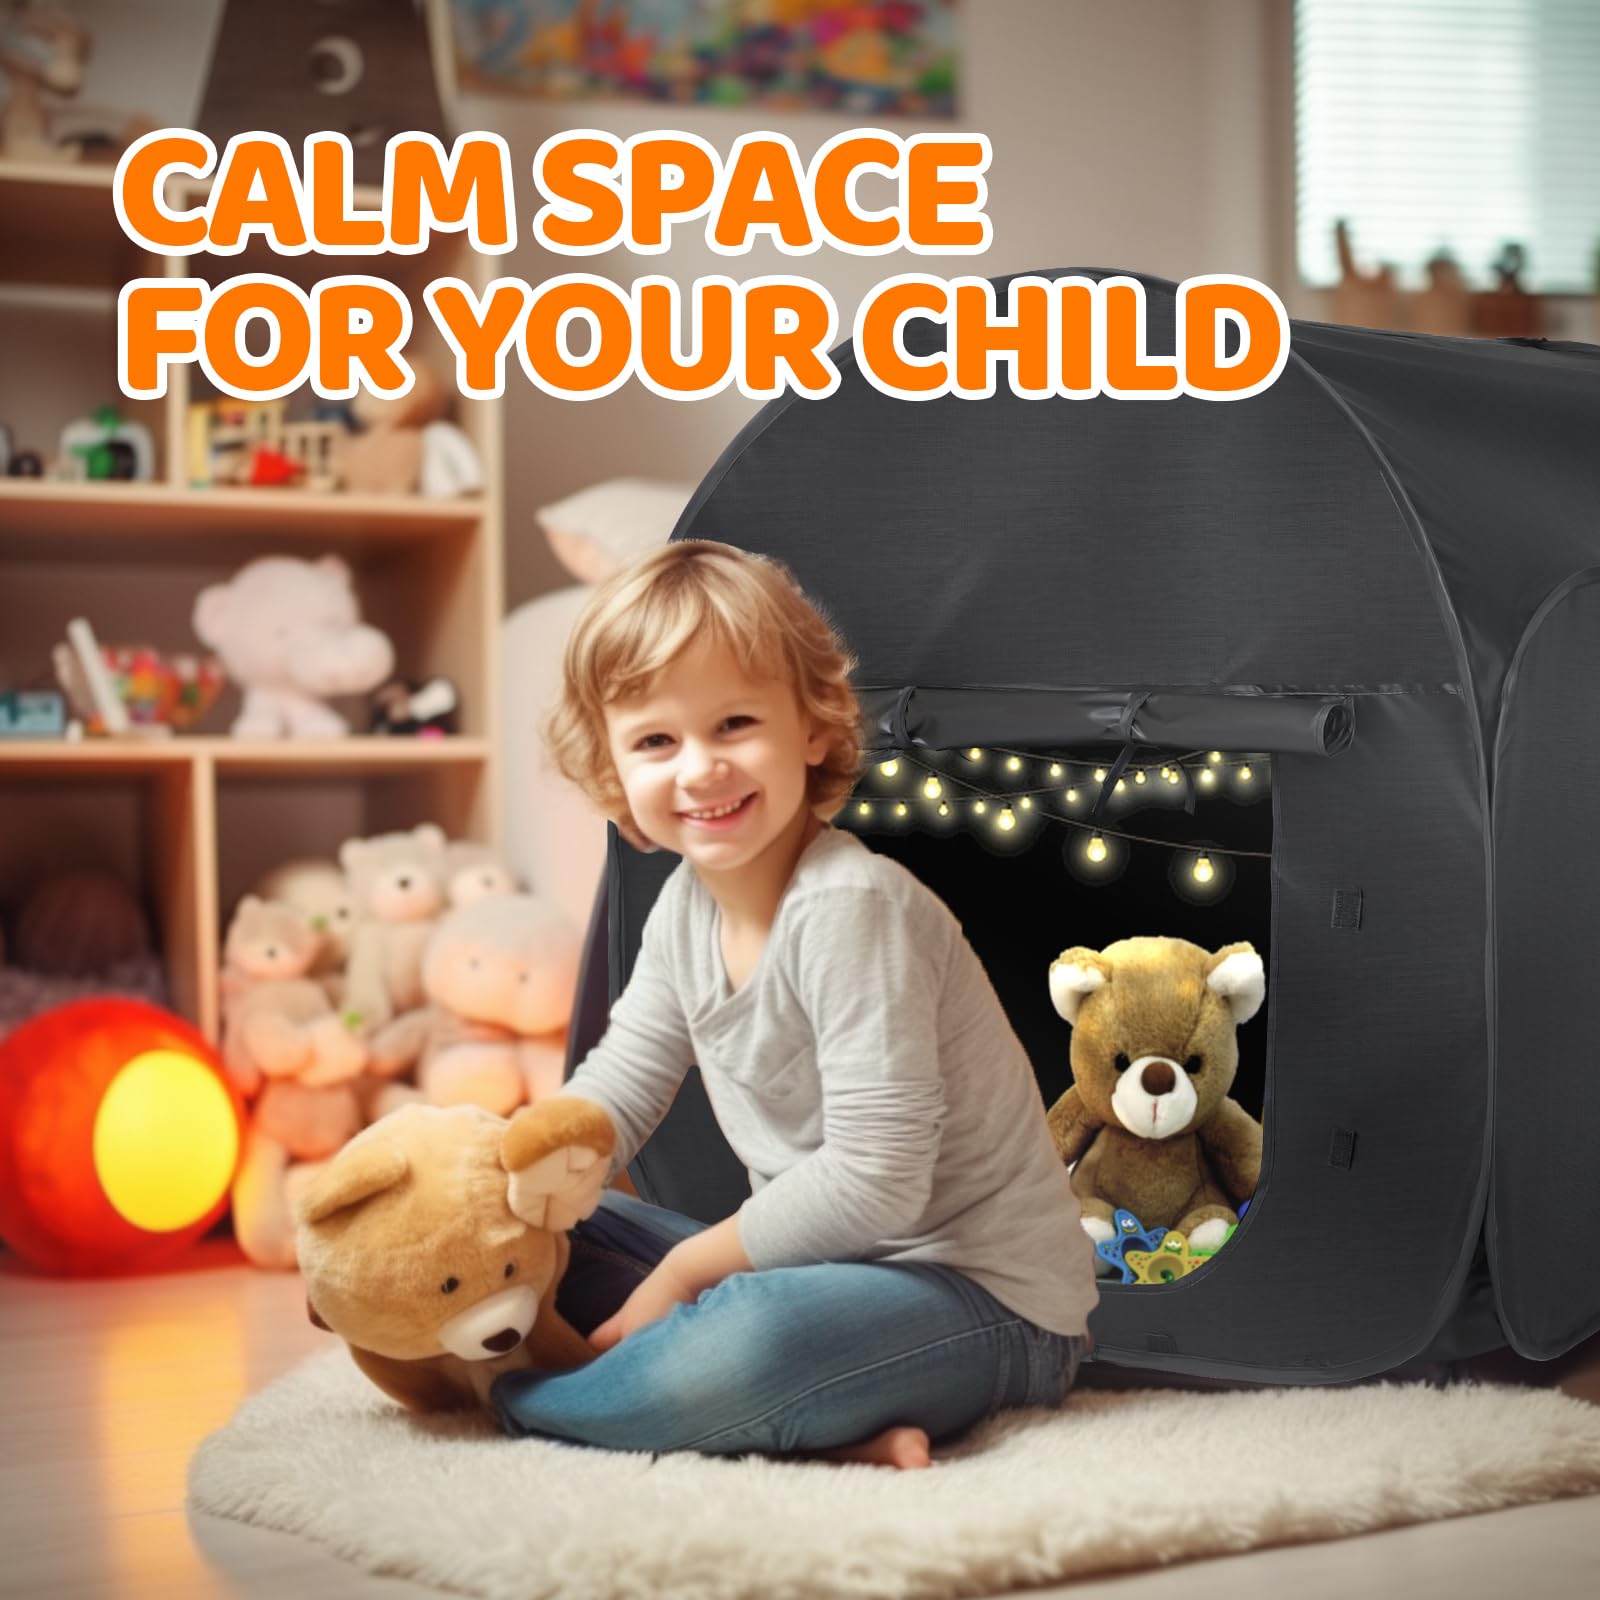 FAHKNS Sensory Tent|Quiet Corner for Kids to Play and Relax|Pop-up Blackout Tent Black|Sensory Play Tent Sensory Den|Special Needs Sensory Tent|Suitable for: SPD, Anxiety, ADHD, Autism, etc.